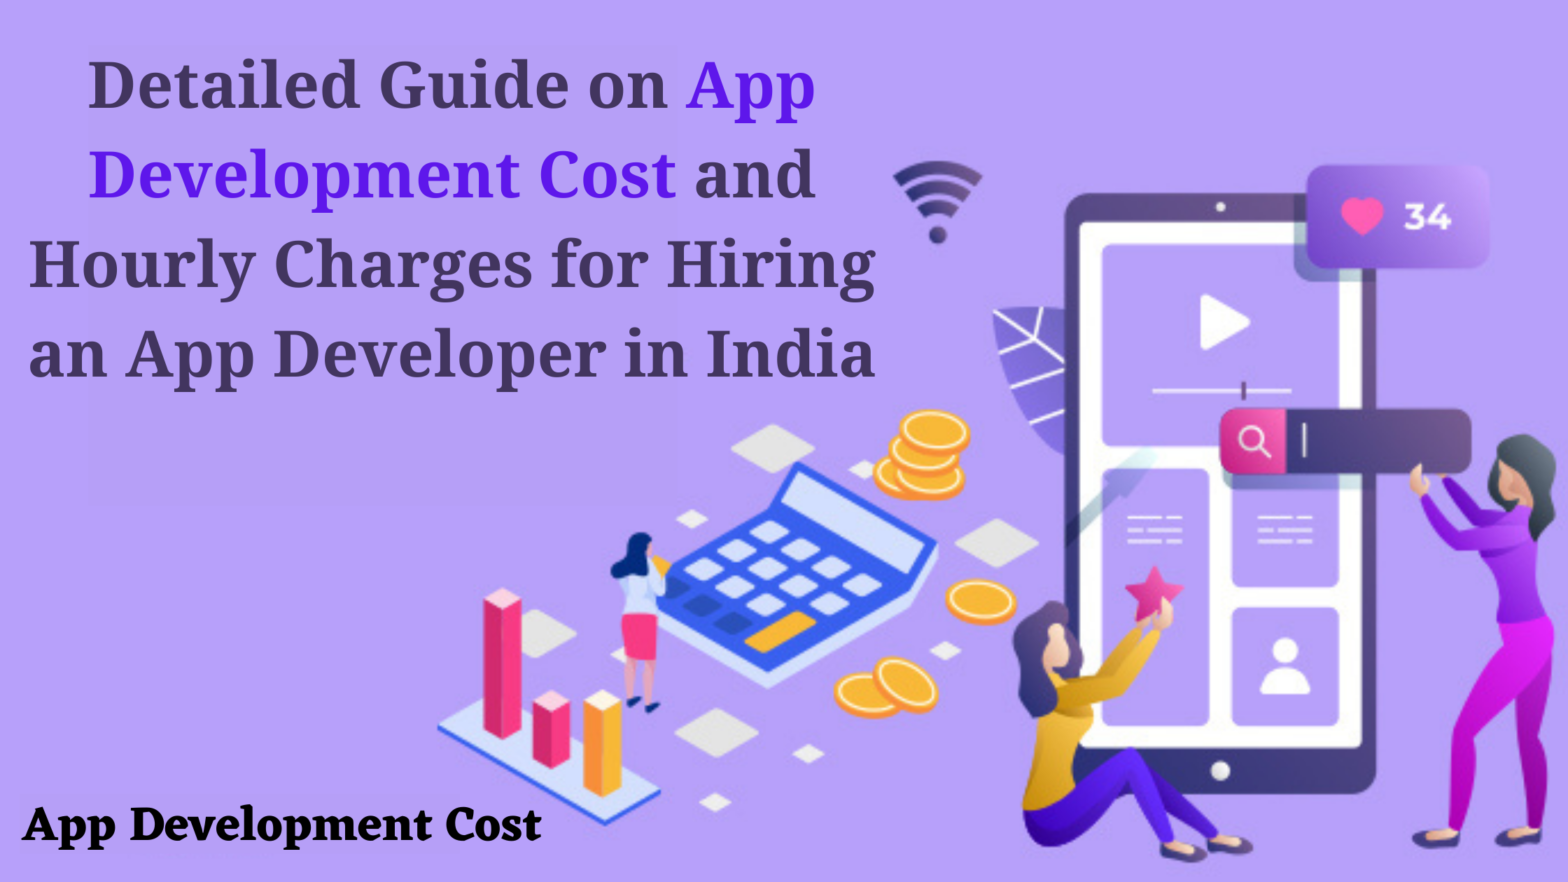 App Development Cost India - Detailed Guide on Hourly Charges for Hiring an App Developer in India